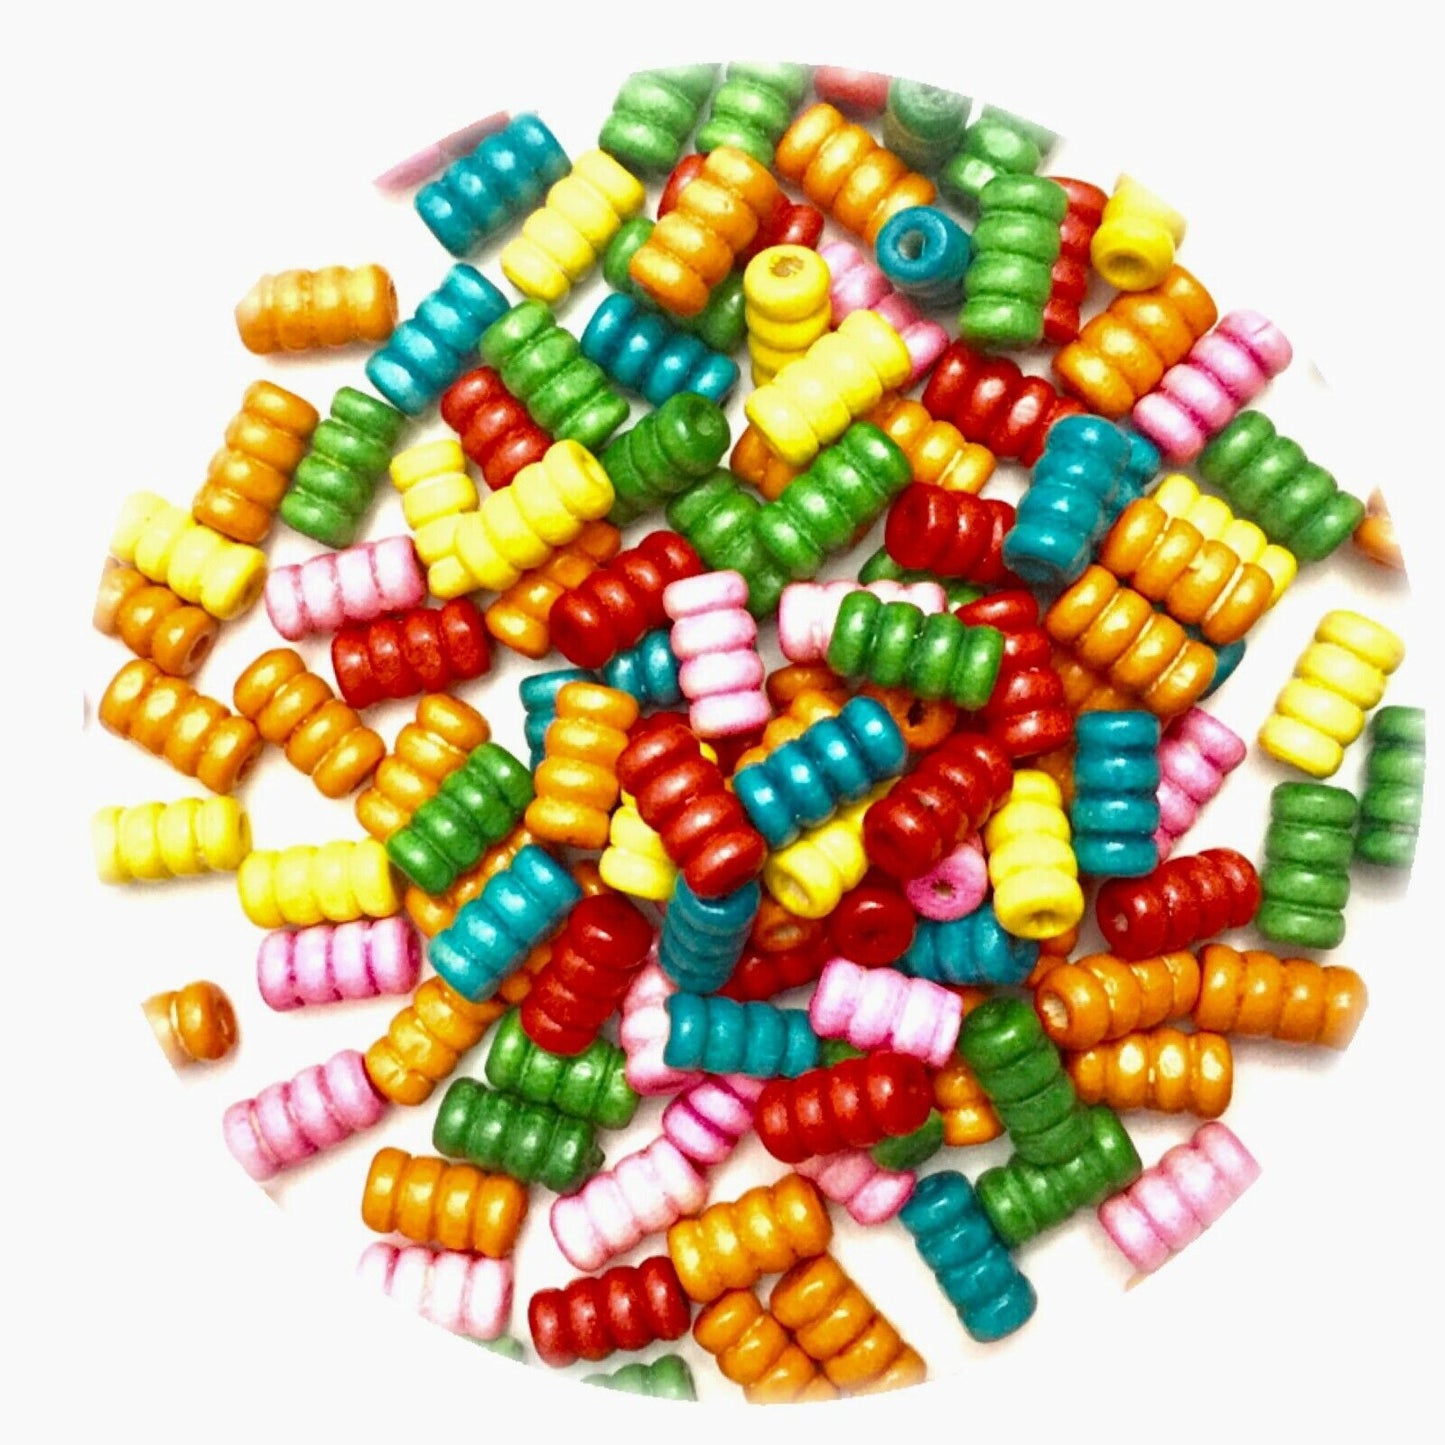 100x Curvy Spiralled Wooden Tube Beads 12x7mm